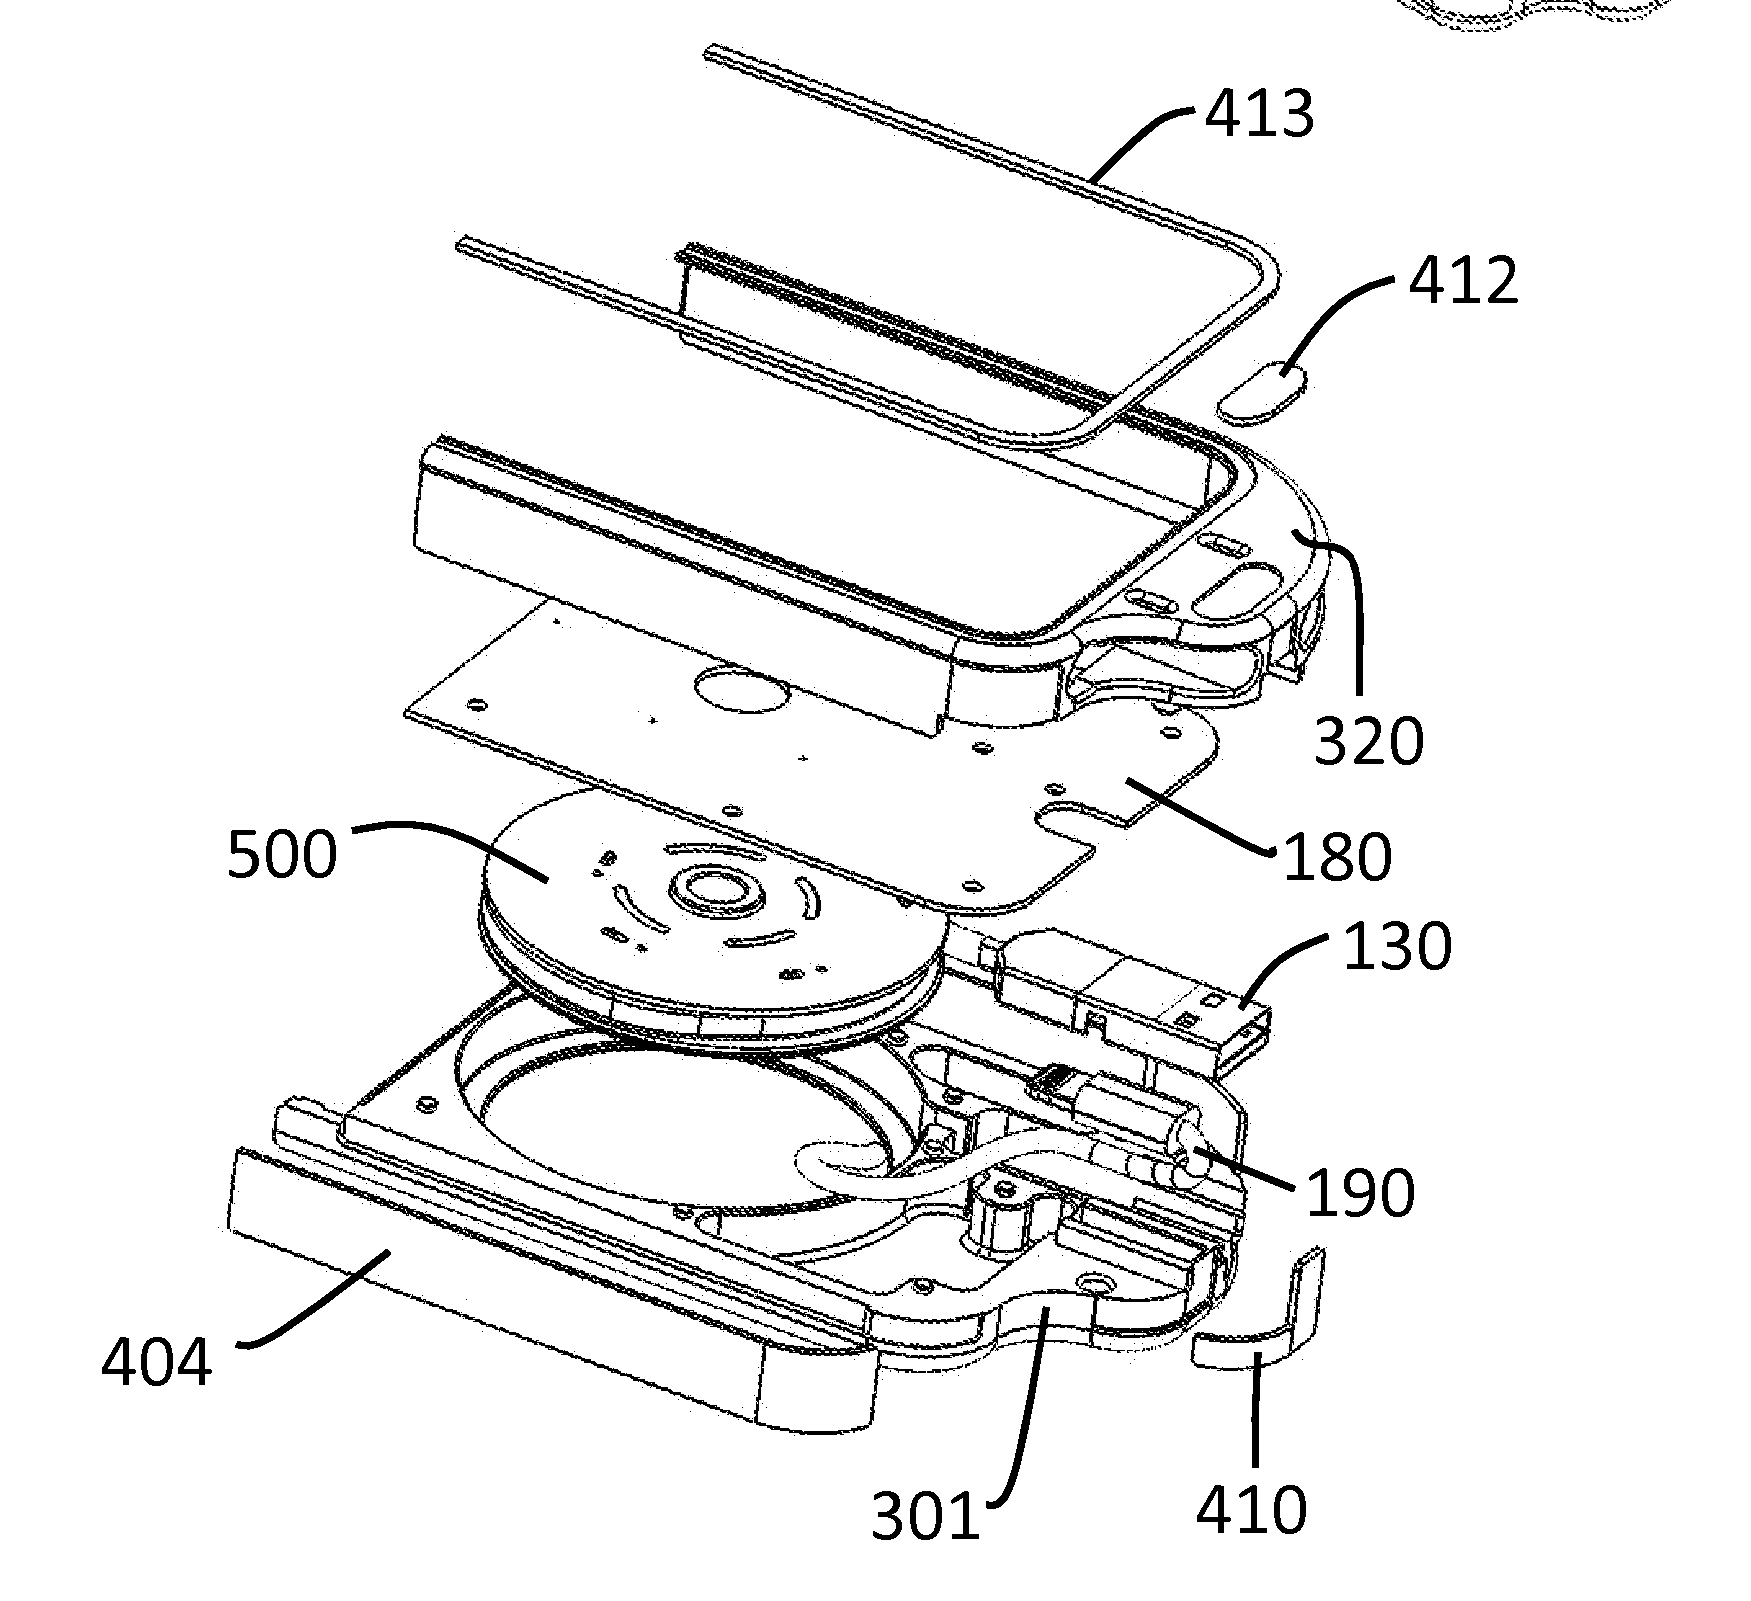 Protective Case for Portable Electronic Device with Integrated Dispensable and Retractable Charge and Sync Cable